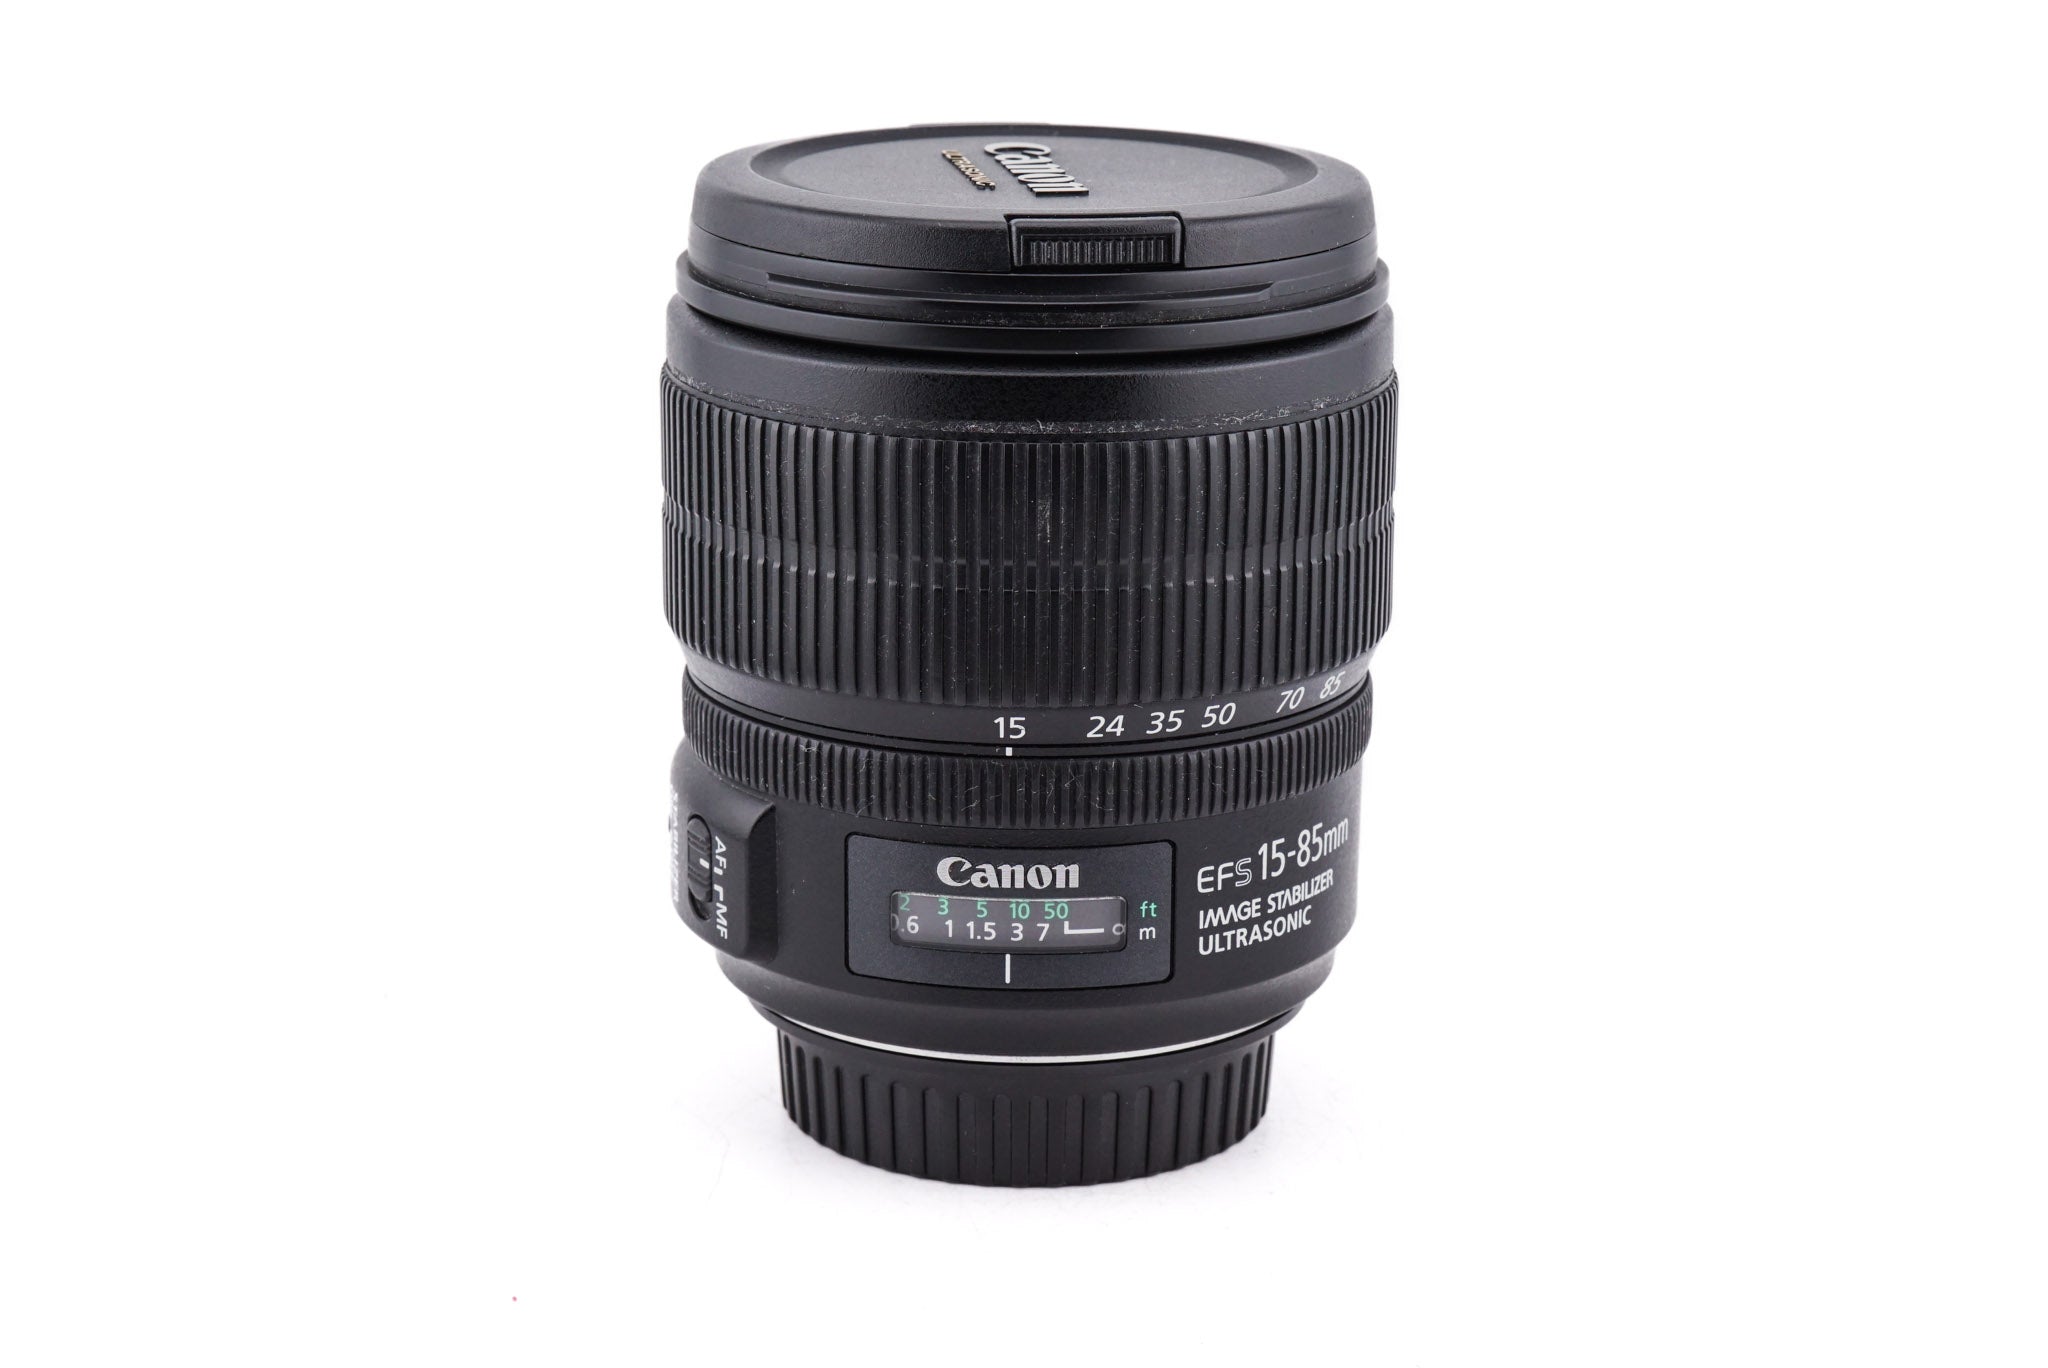 Canon 15-85mm f3.5-5.6 IS USM - Lens